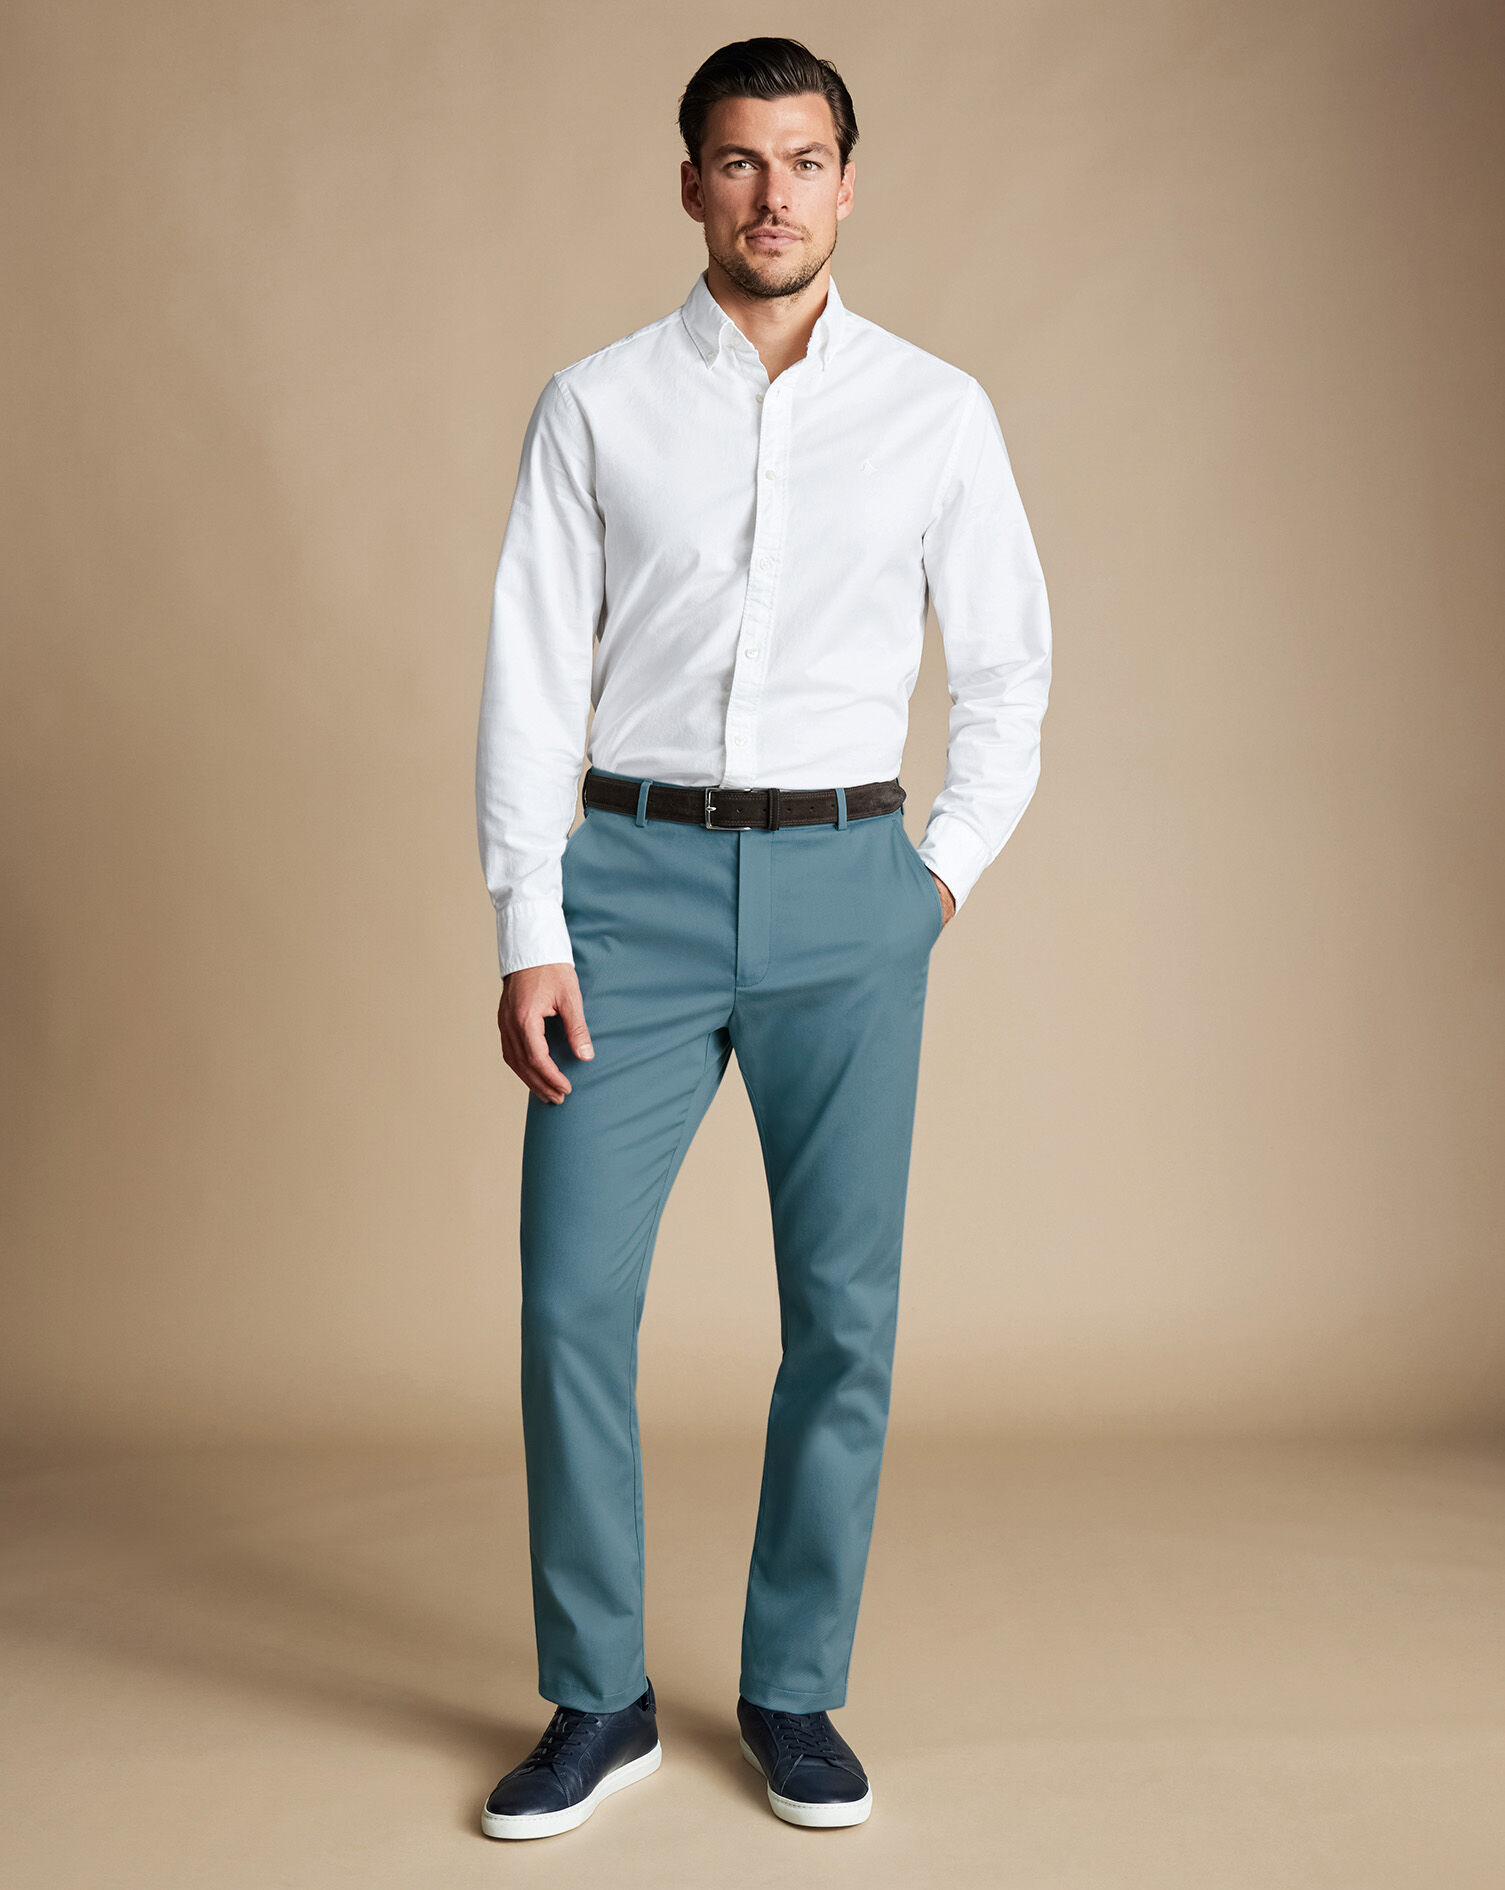 Sky Blue Shirt with Beige Pants – Curato